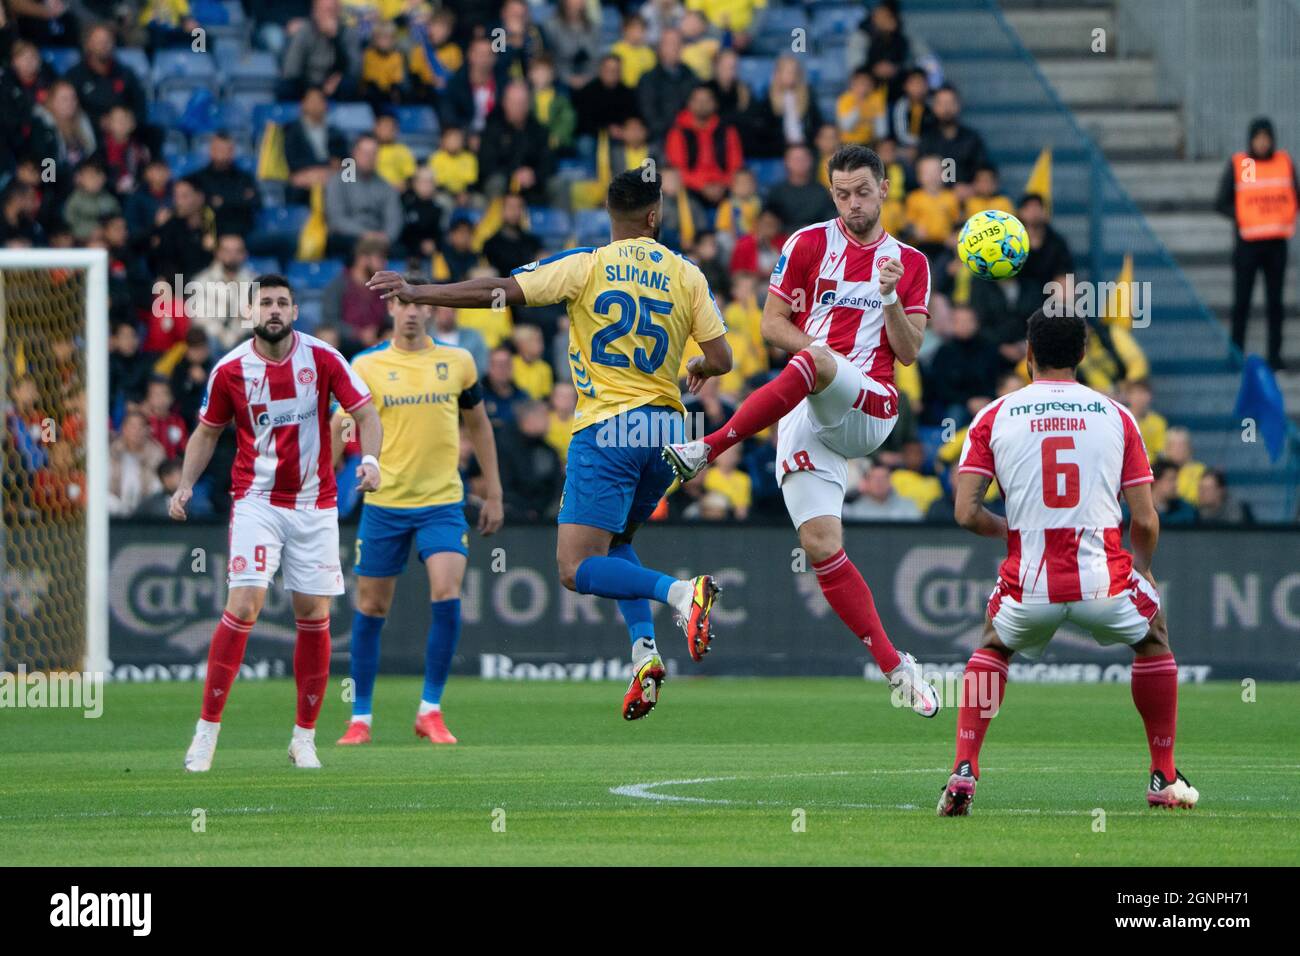 Brondby, Denmark. 26th Sep, 2021. Anis Ben Slimane (25) of Broendby IF and Louka Prip (18) of Aalborg Boldklub seen during the 3F Superliga match between Broendby IF and Aalborg Boldklub at Brondby Stadion. (Photo Credit: Gonzales Photo/Alamy Live News Stock Photo